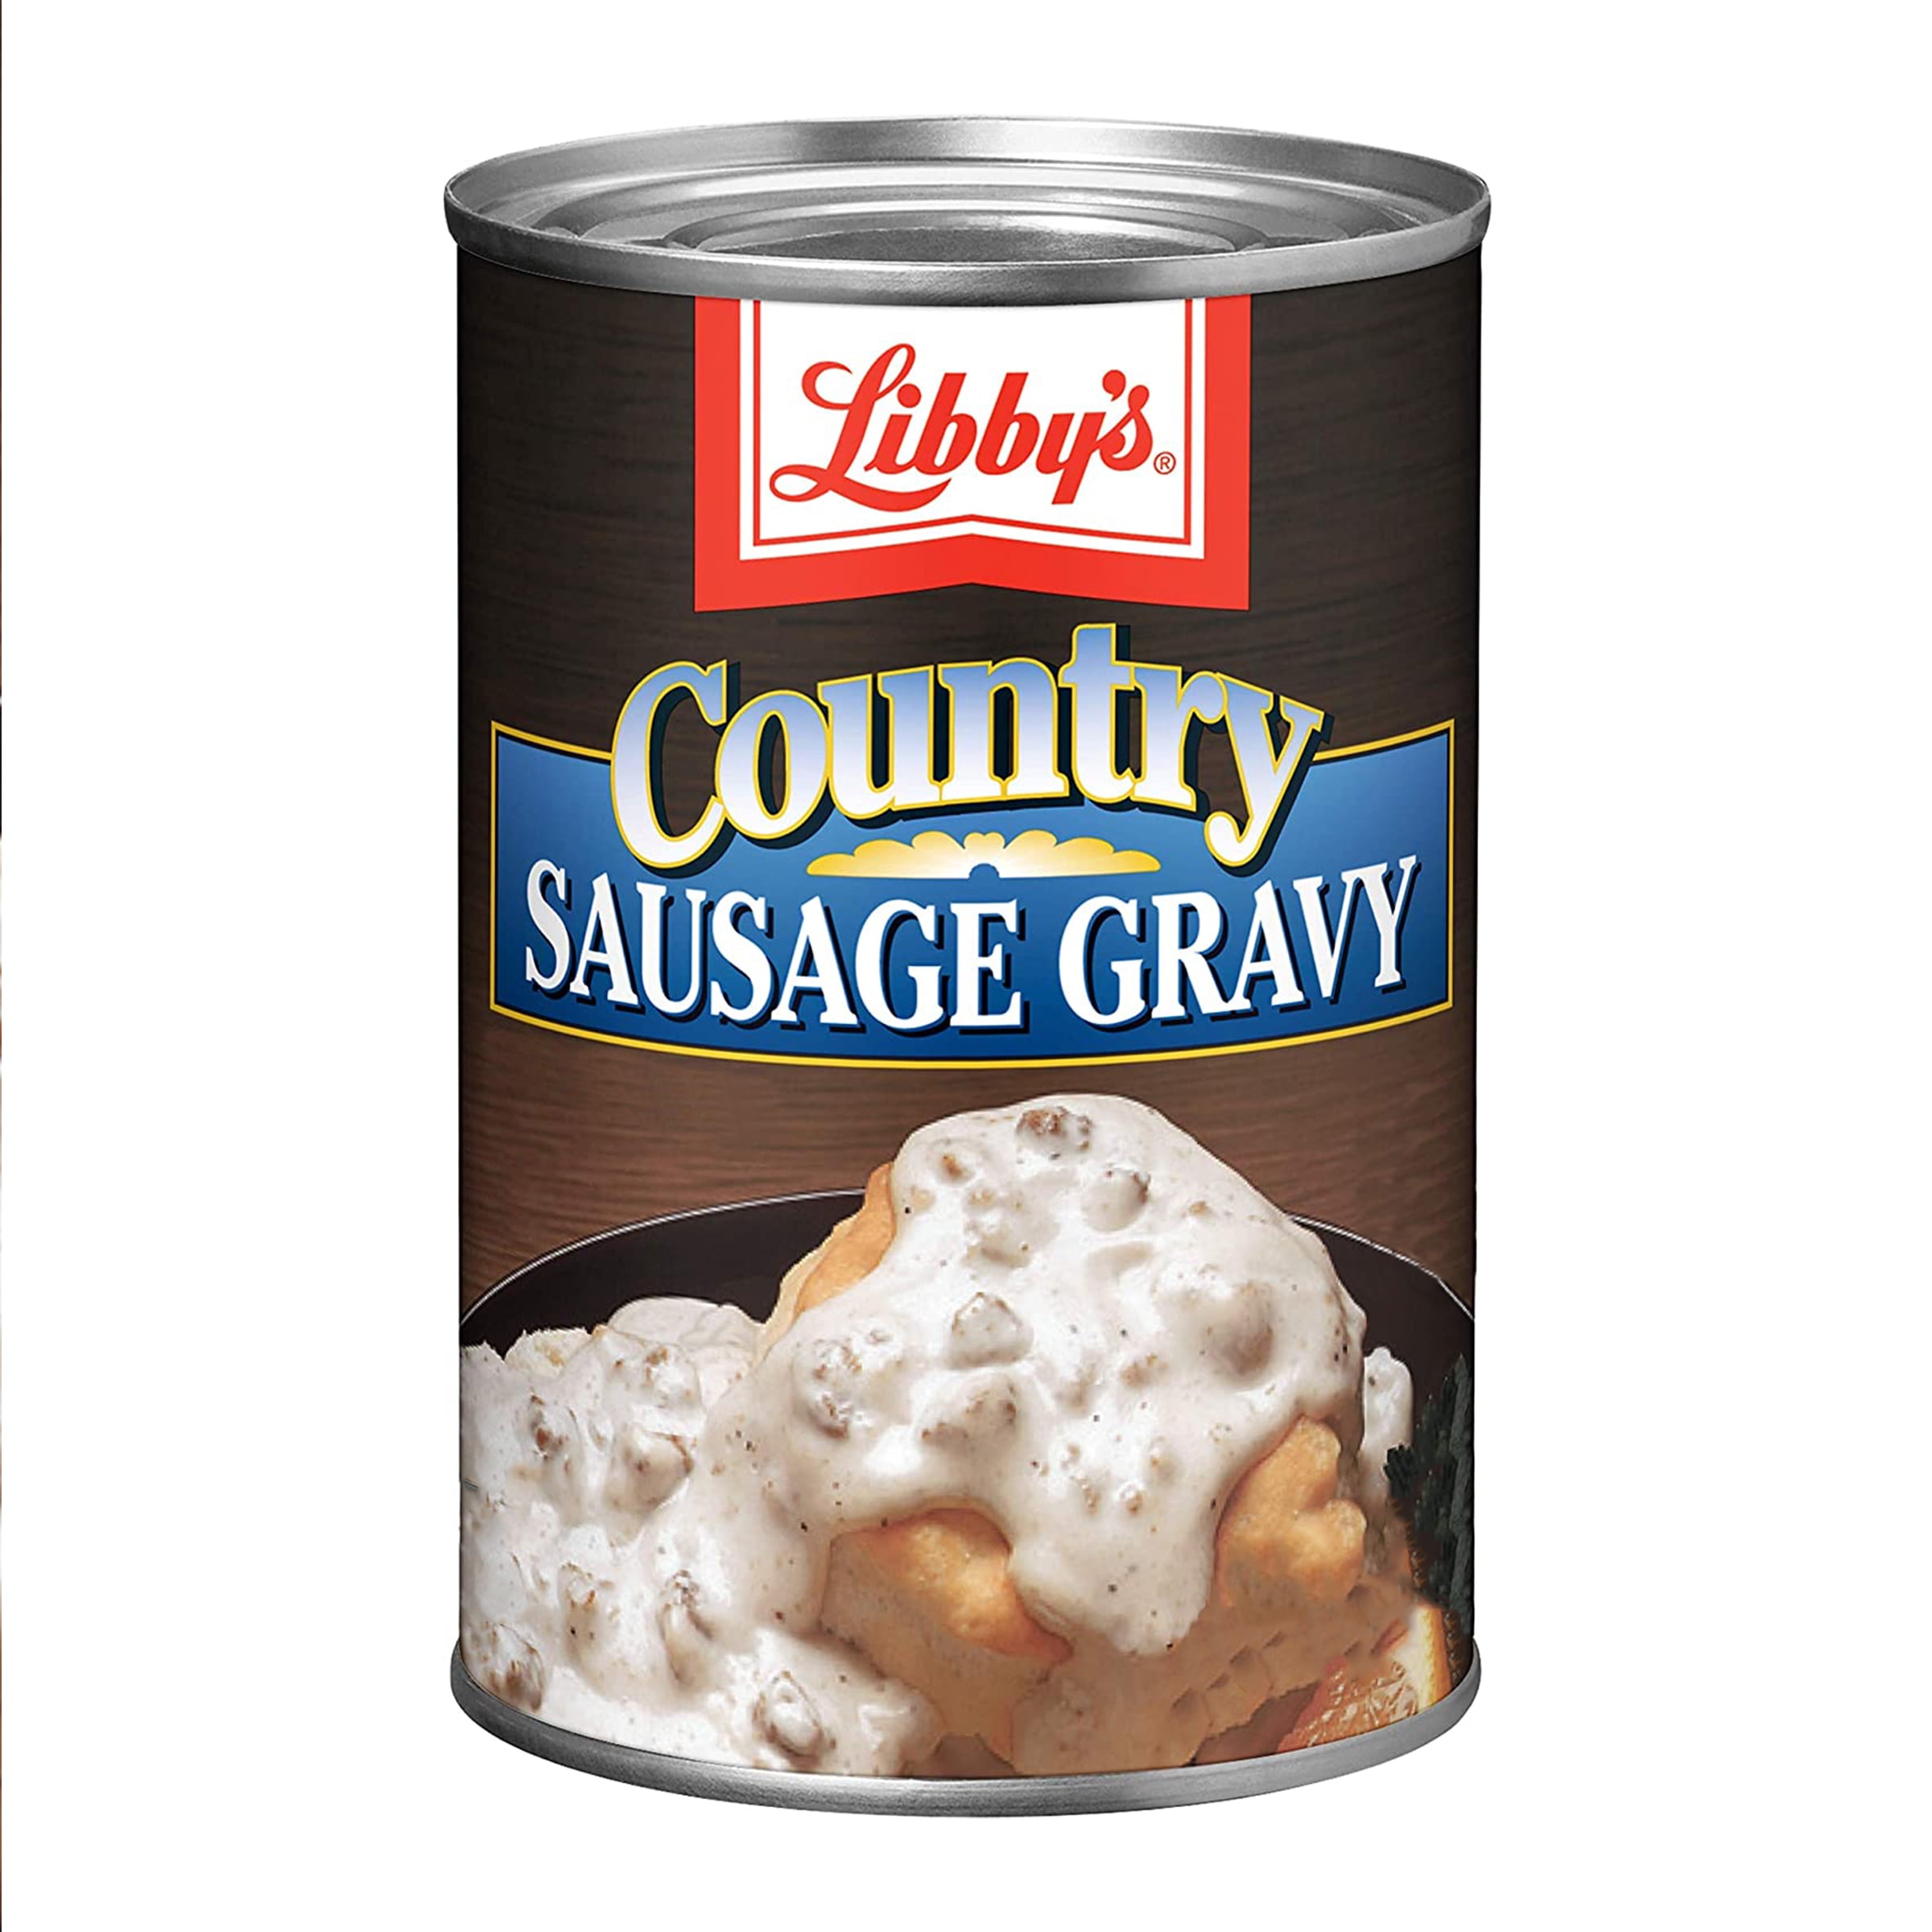 Libby's Country Sausage Gravy, Canned Sausage Gravy, 15 Oz